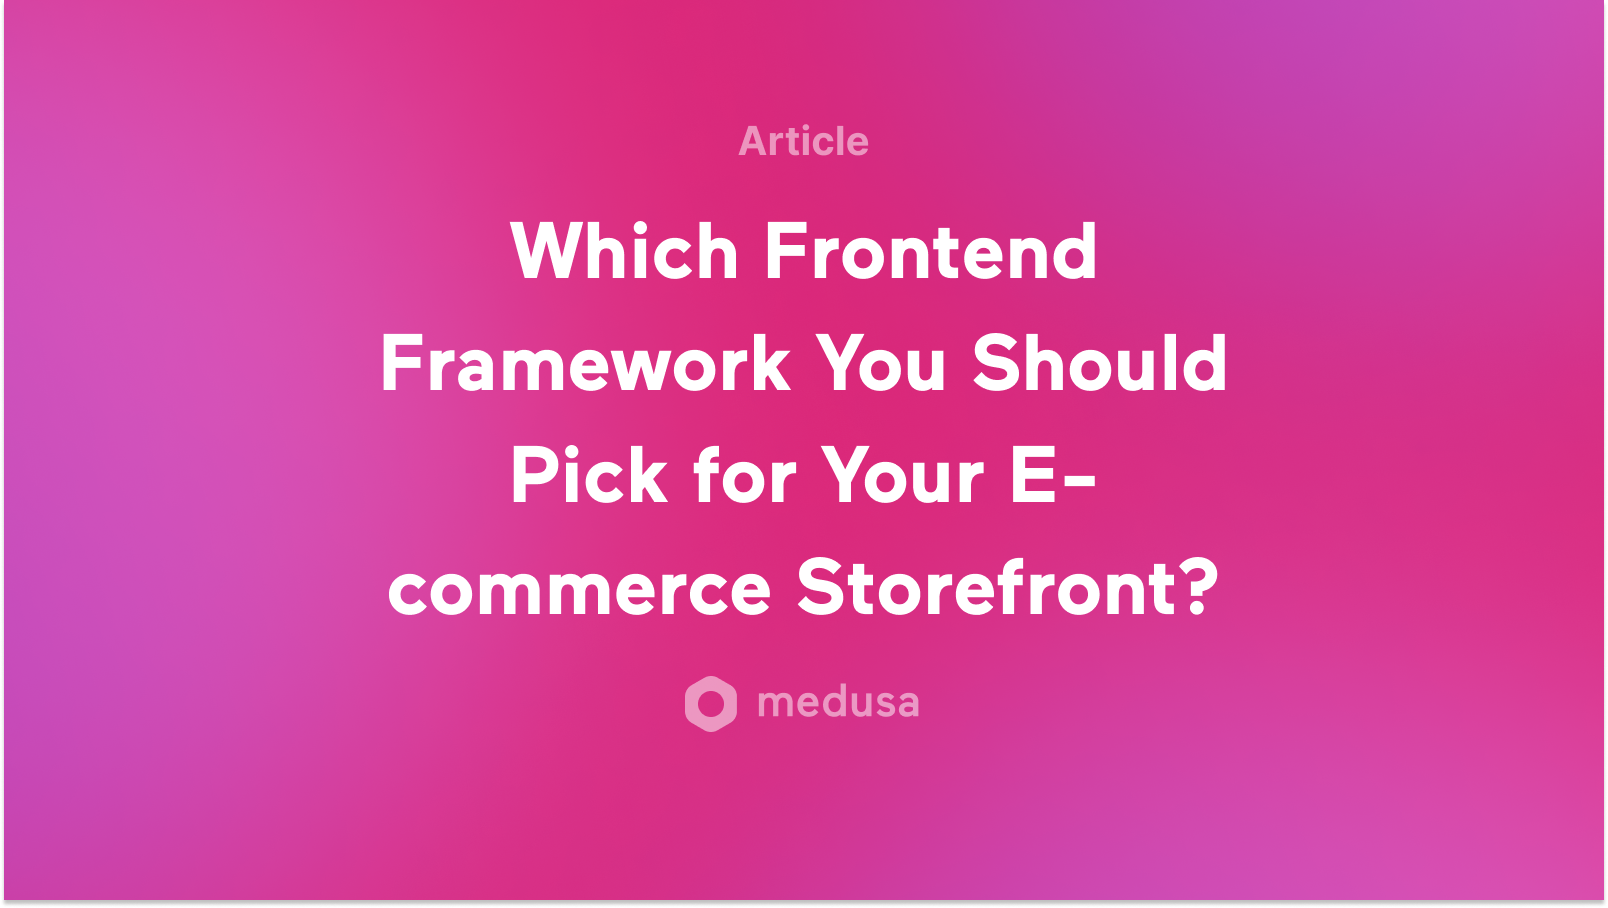 Which Frontend Framework You Should Pick for Your E-commerce Storefront?